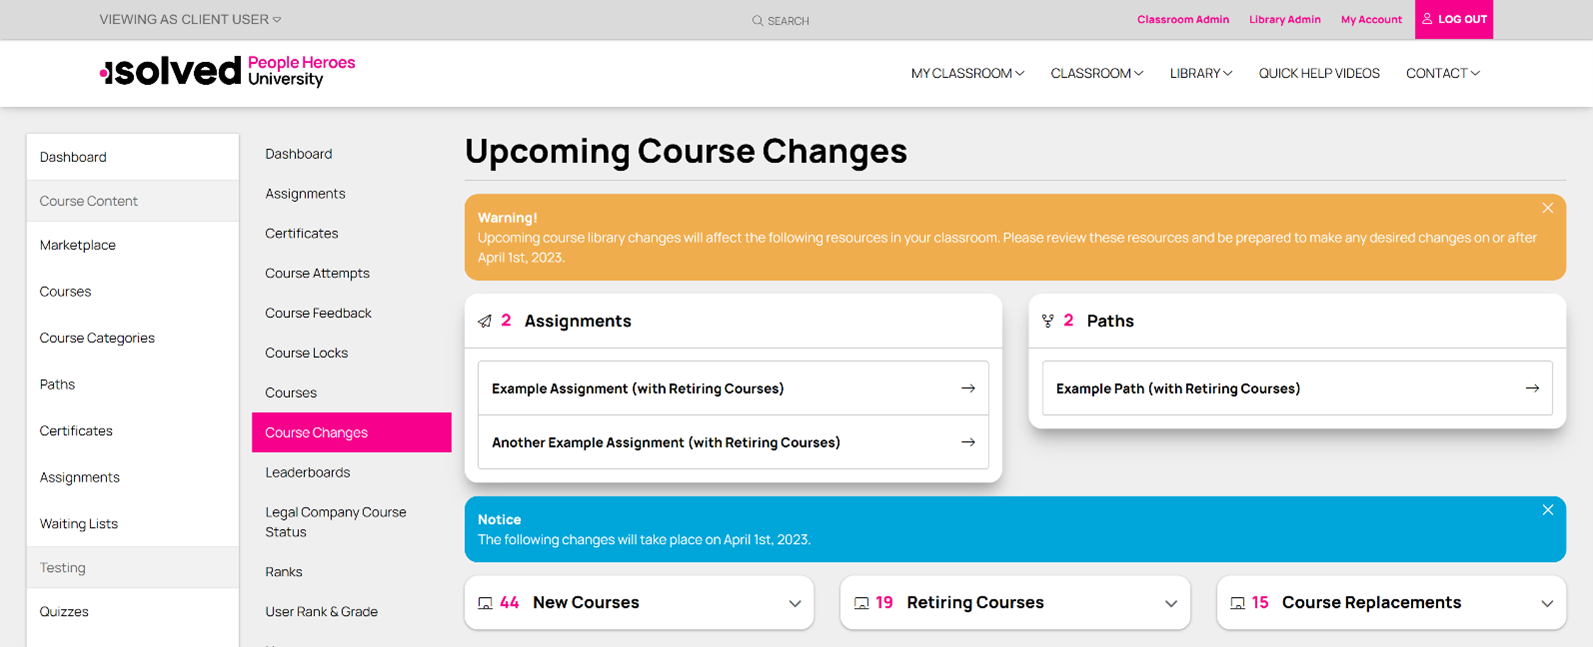 Upcoming Course Changes - Concerns